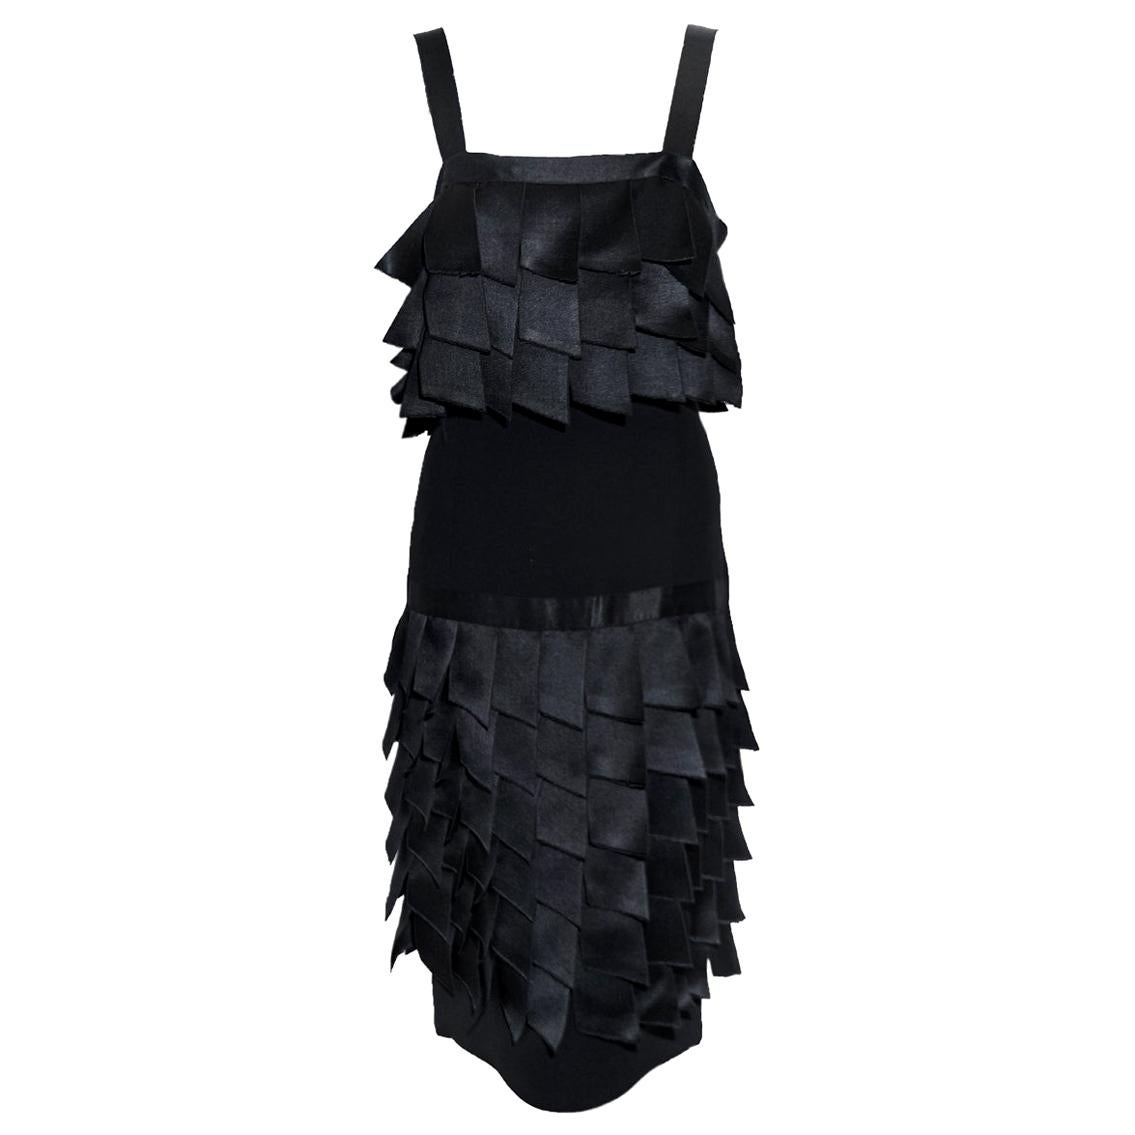 Chanel Boutique Black Frayed Satin Ribbon Tabs Layered Bodice & Skirt of Dress  For Sale